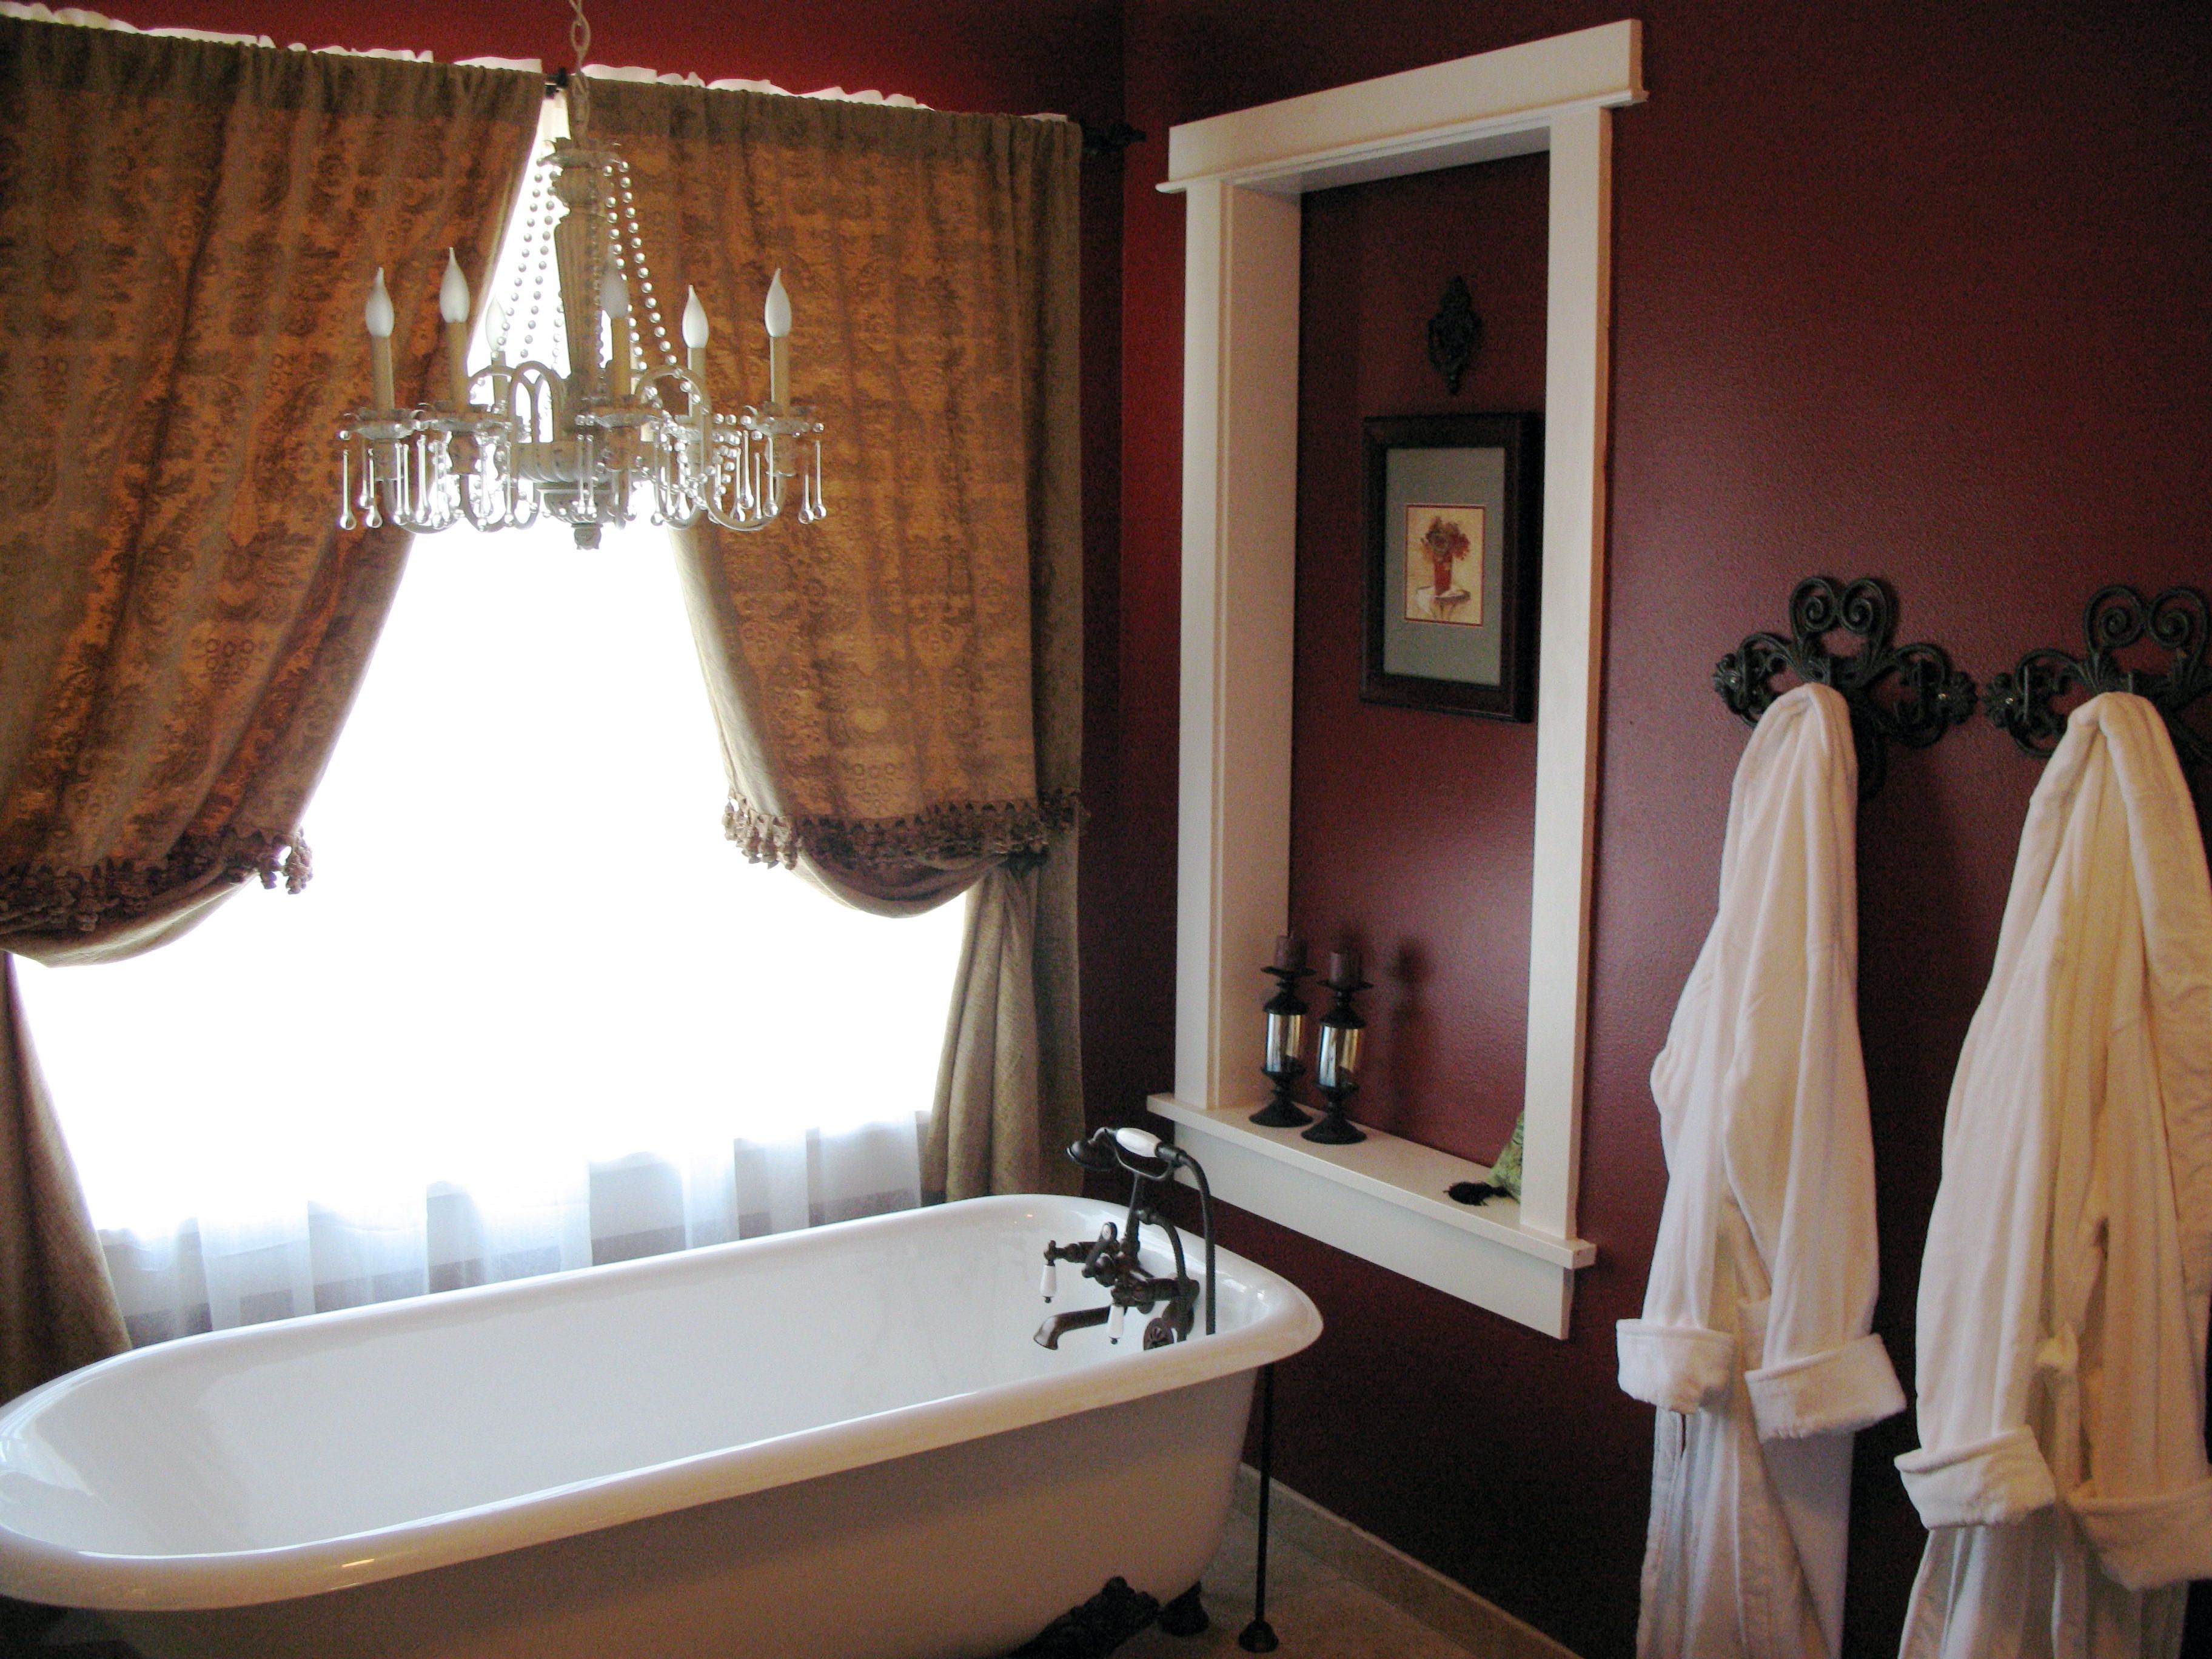 Classic Red Bathroom With A Claw Foot Tub And Chandelier Also Tied Back Curtains (View 11 of 29)